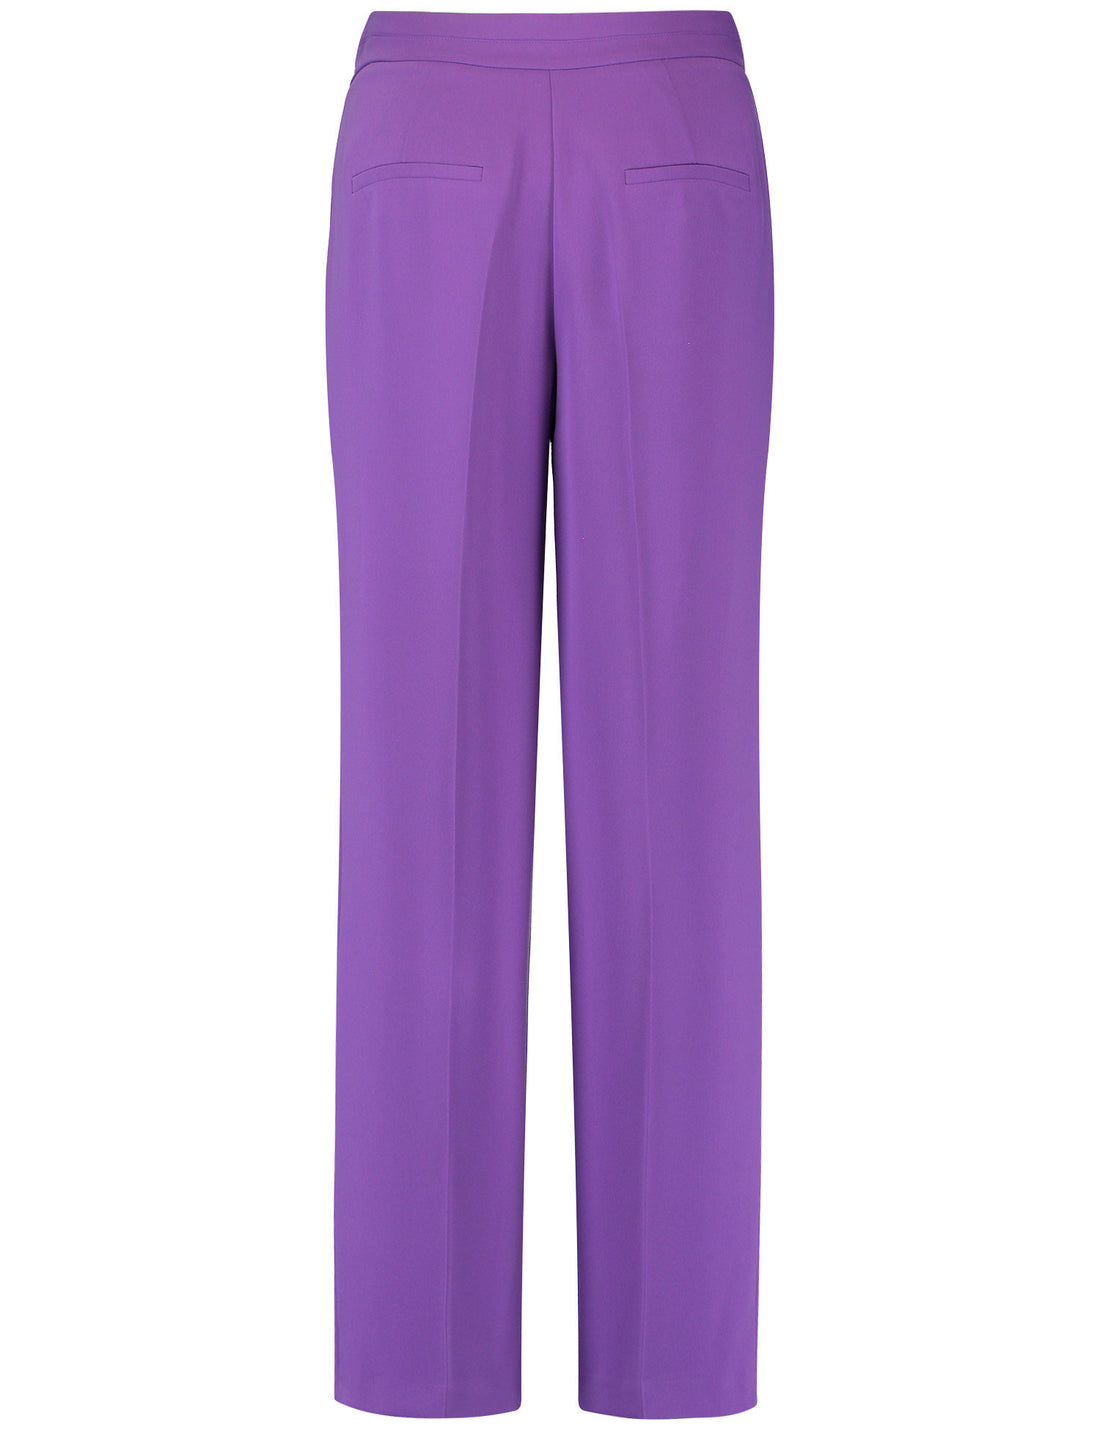 Flowing Trousers With Pressed Pleats_220002-31222_30904_02